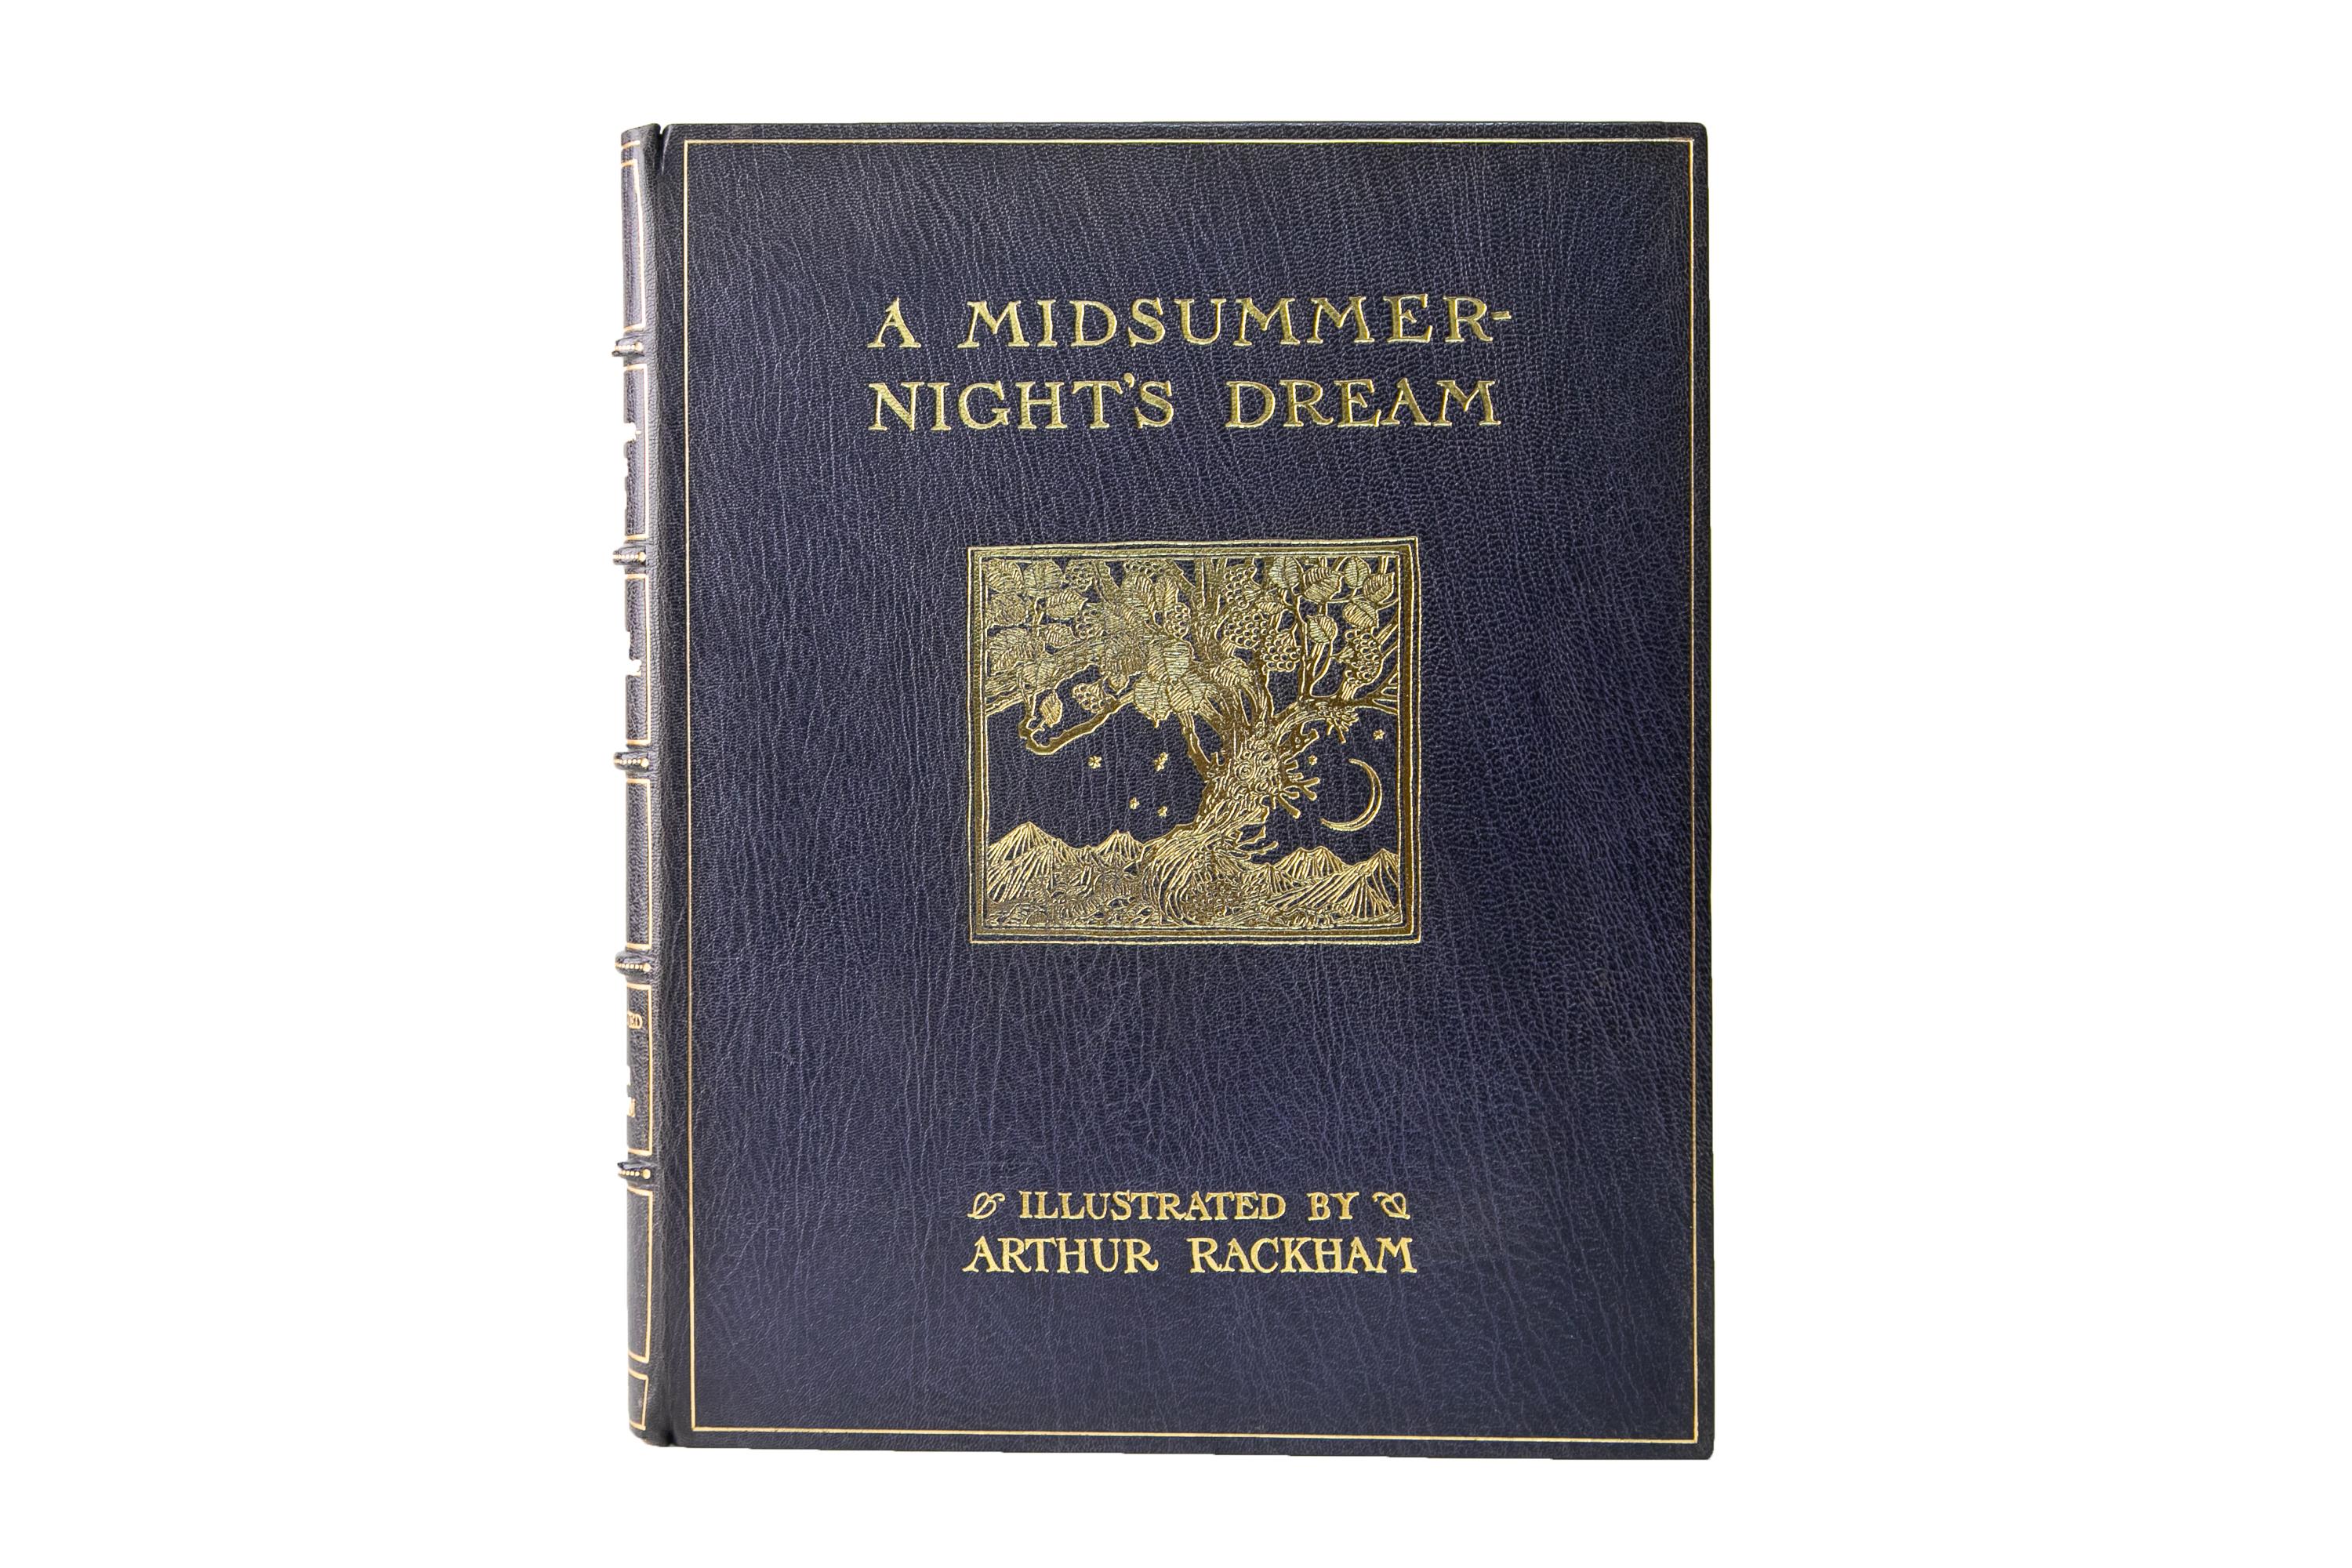 1 Volume. William Shakespeare, A Midsummer Night's Dream. Limited Edition. Bound by Chelsea Bindery in full blue Morocco with the cover displaying borders, titles, and a central depiction of a scene with a tree, all gilt-tooled. The top edge is